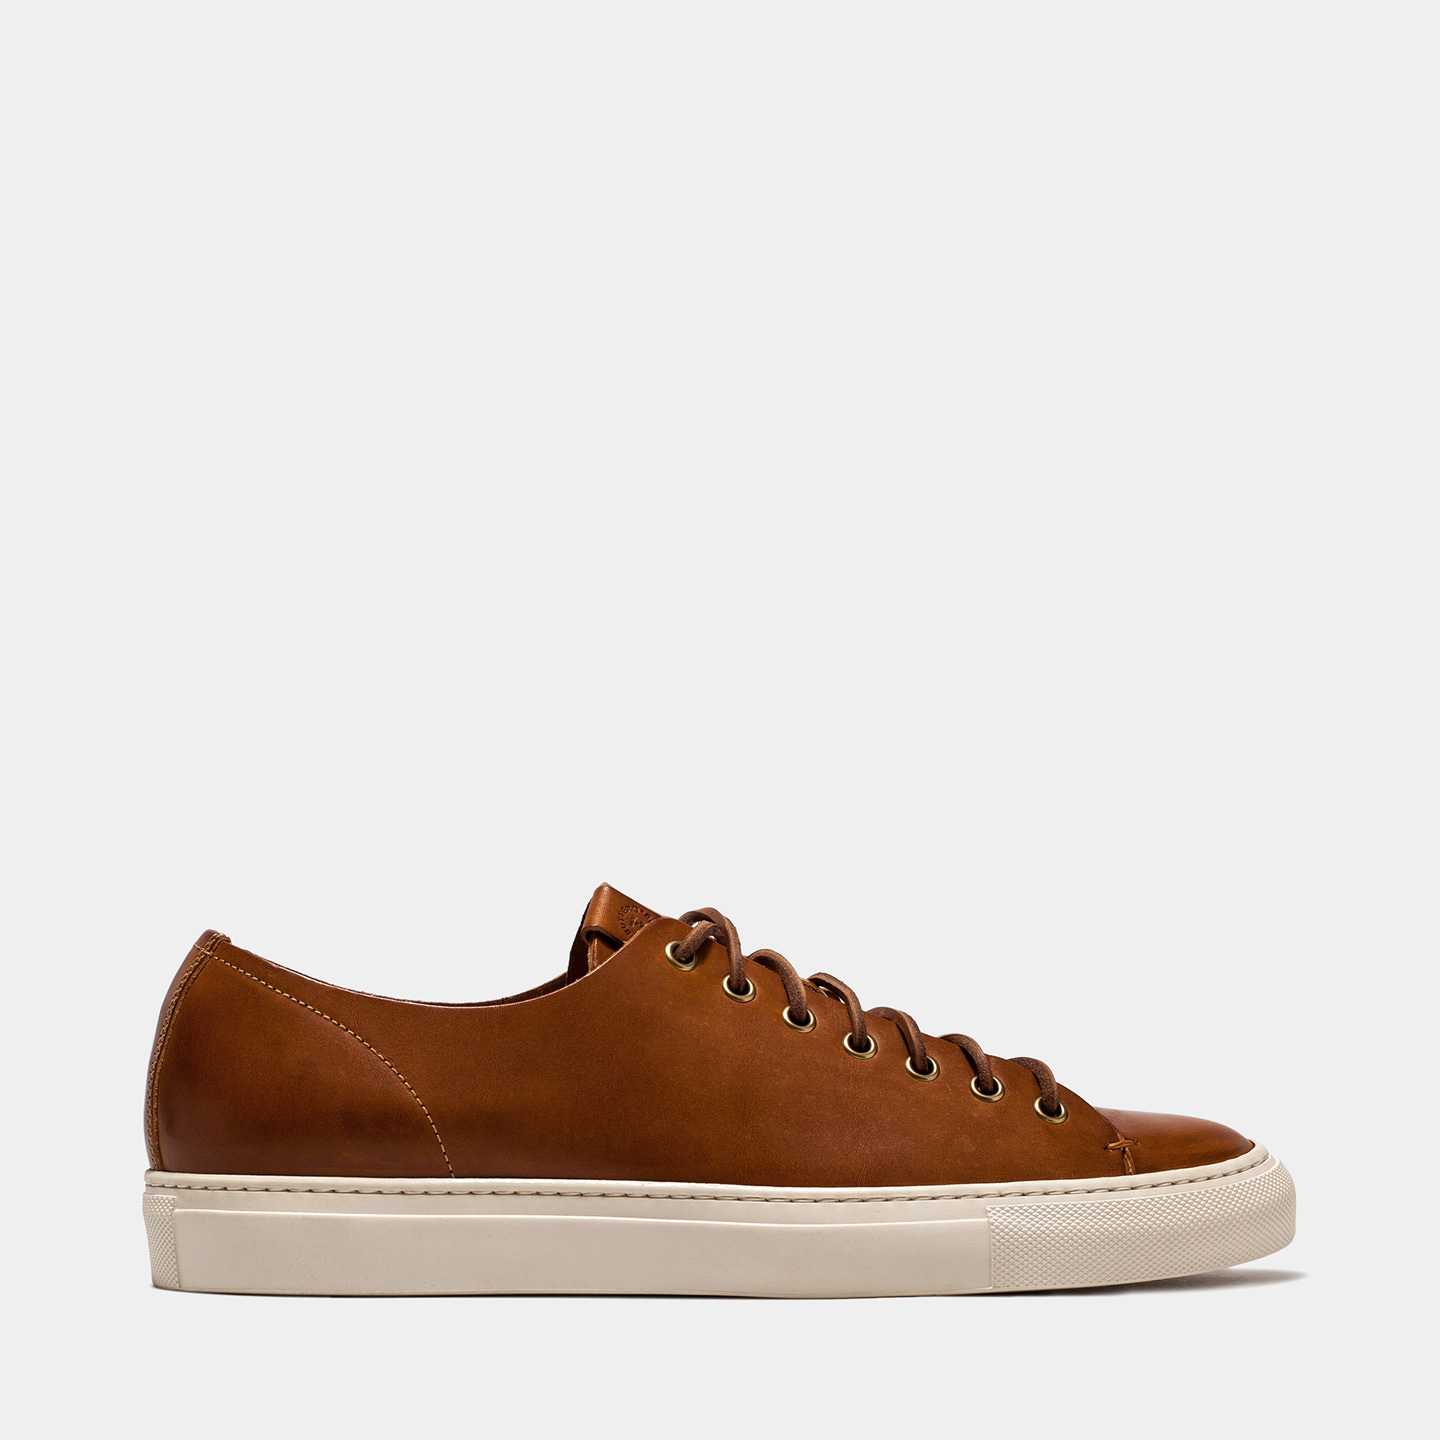 BUTTERO: NATURAL BROWN LEATHER TANINO LOW SNEAKERS